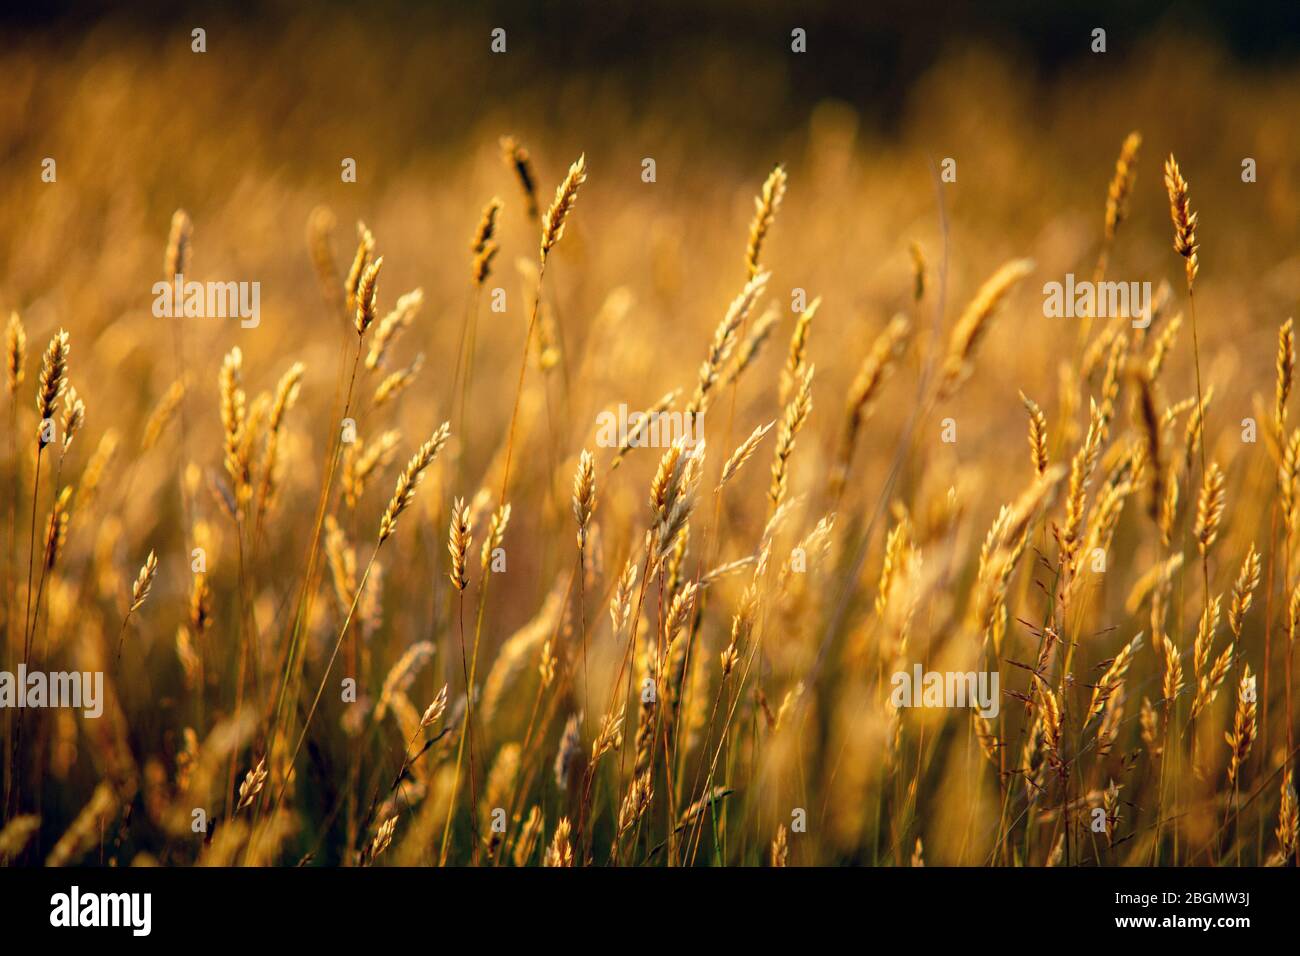 Golden grasses are illuminated by late afternoon light during a late summer evening in rural Yorkshire, UK. Stock Photo